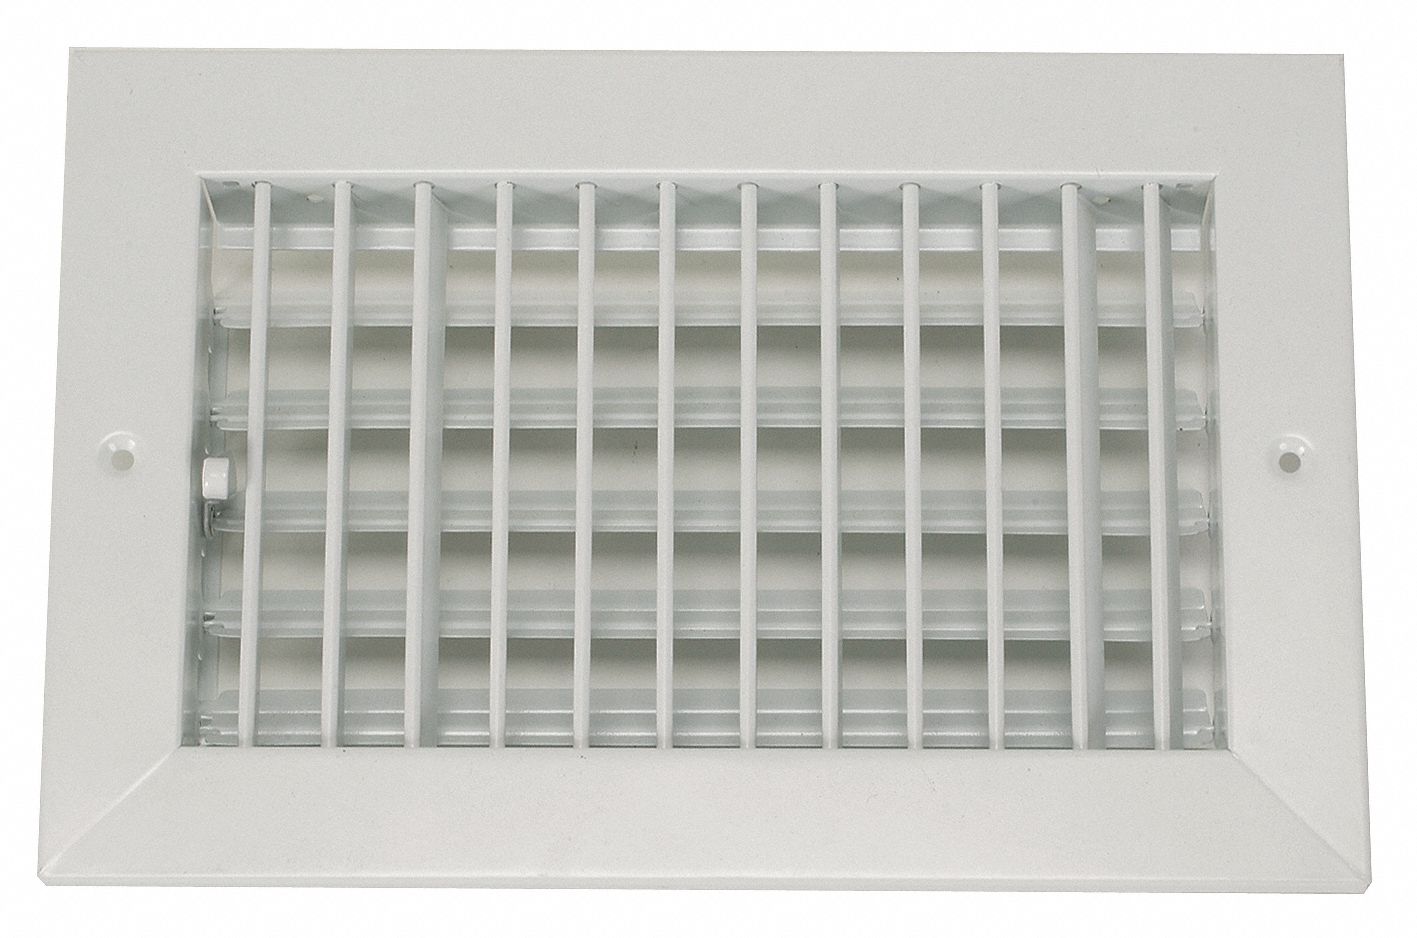 Sidewall Ceiling Register 1 Way Multilouver White 8 Max Duct Height In